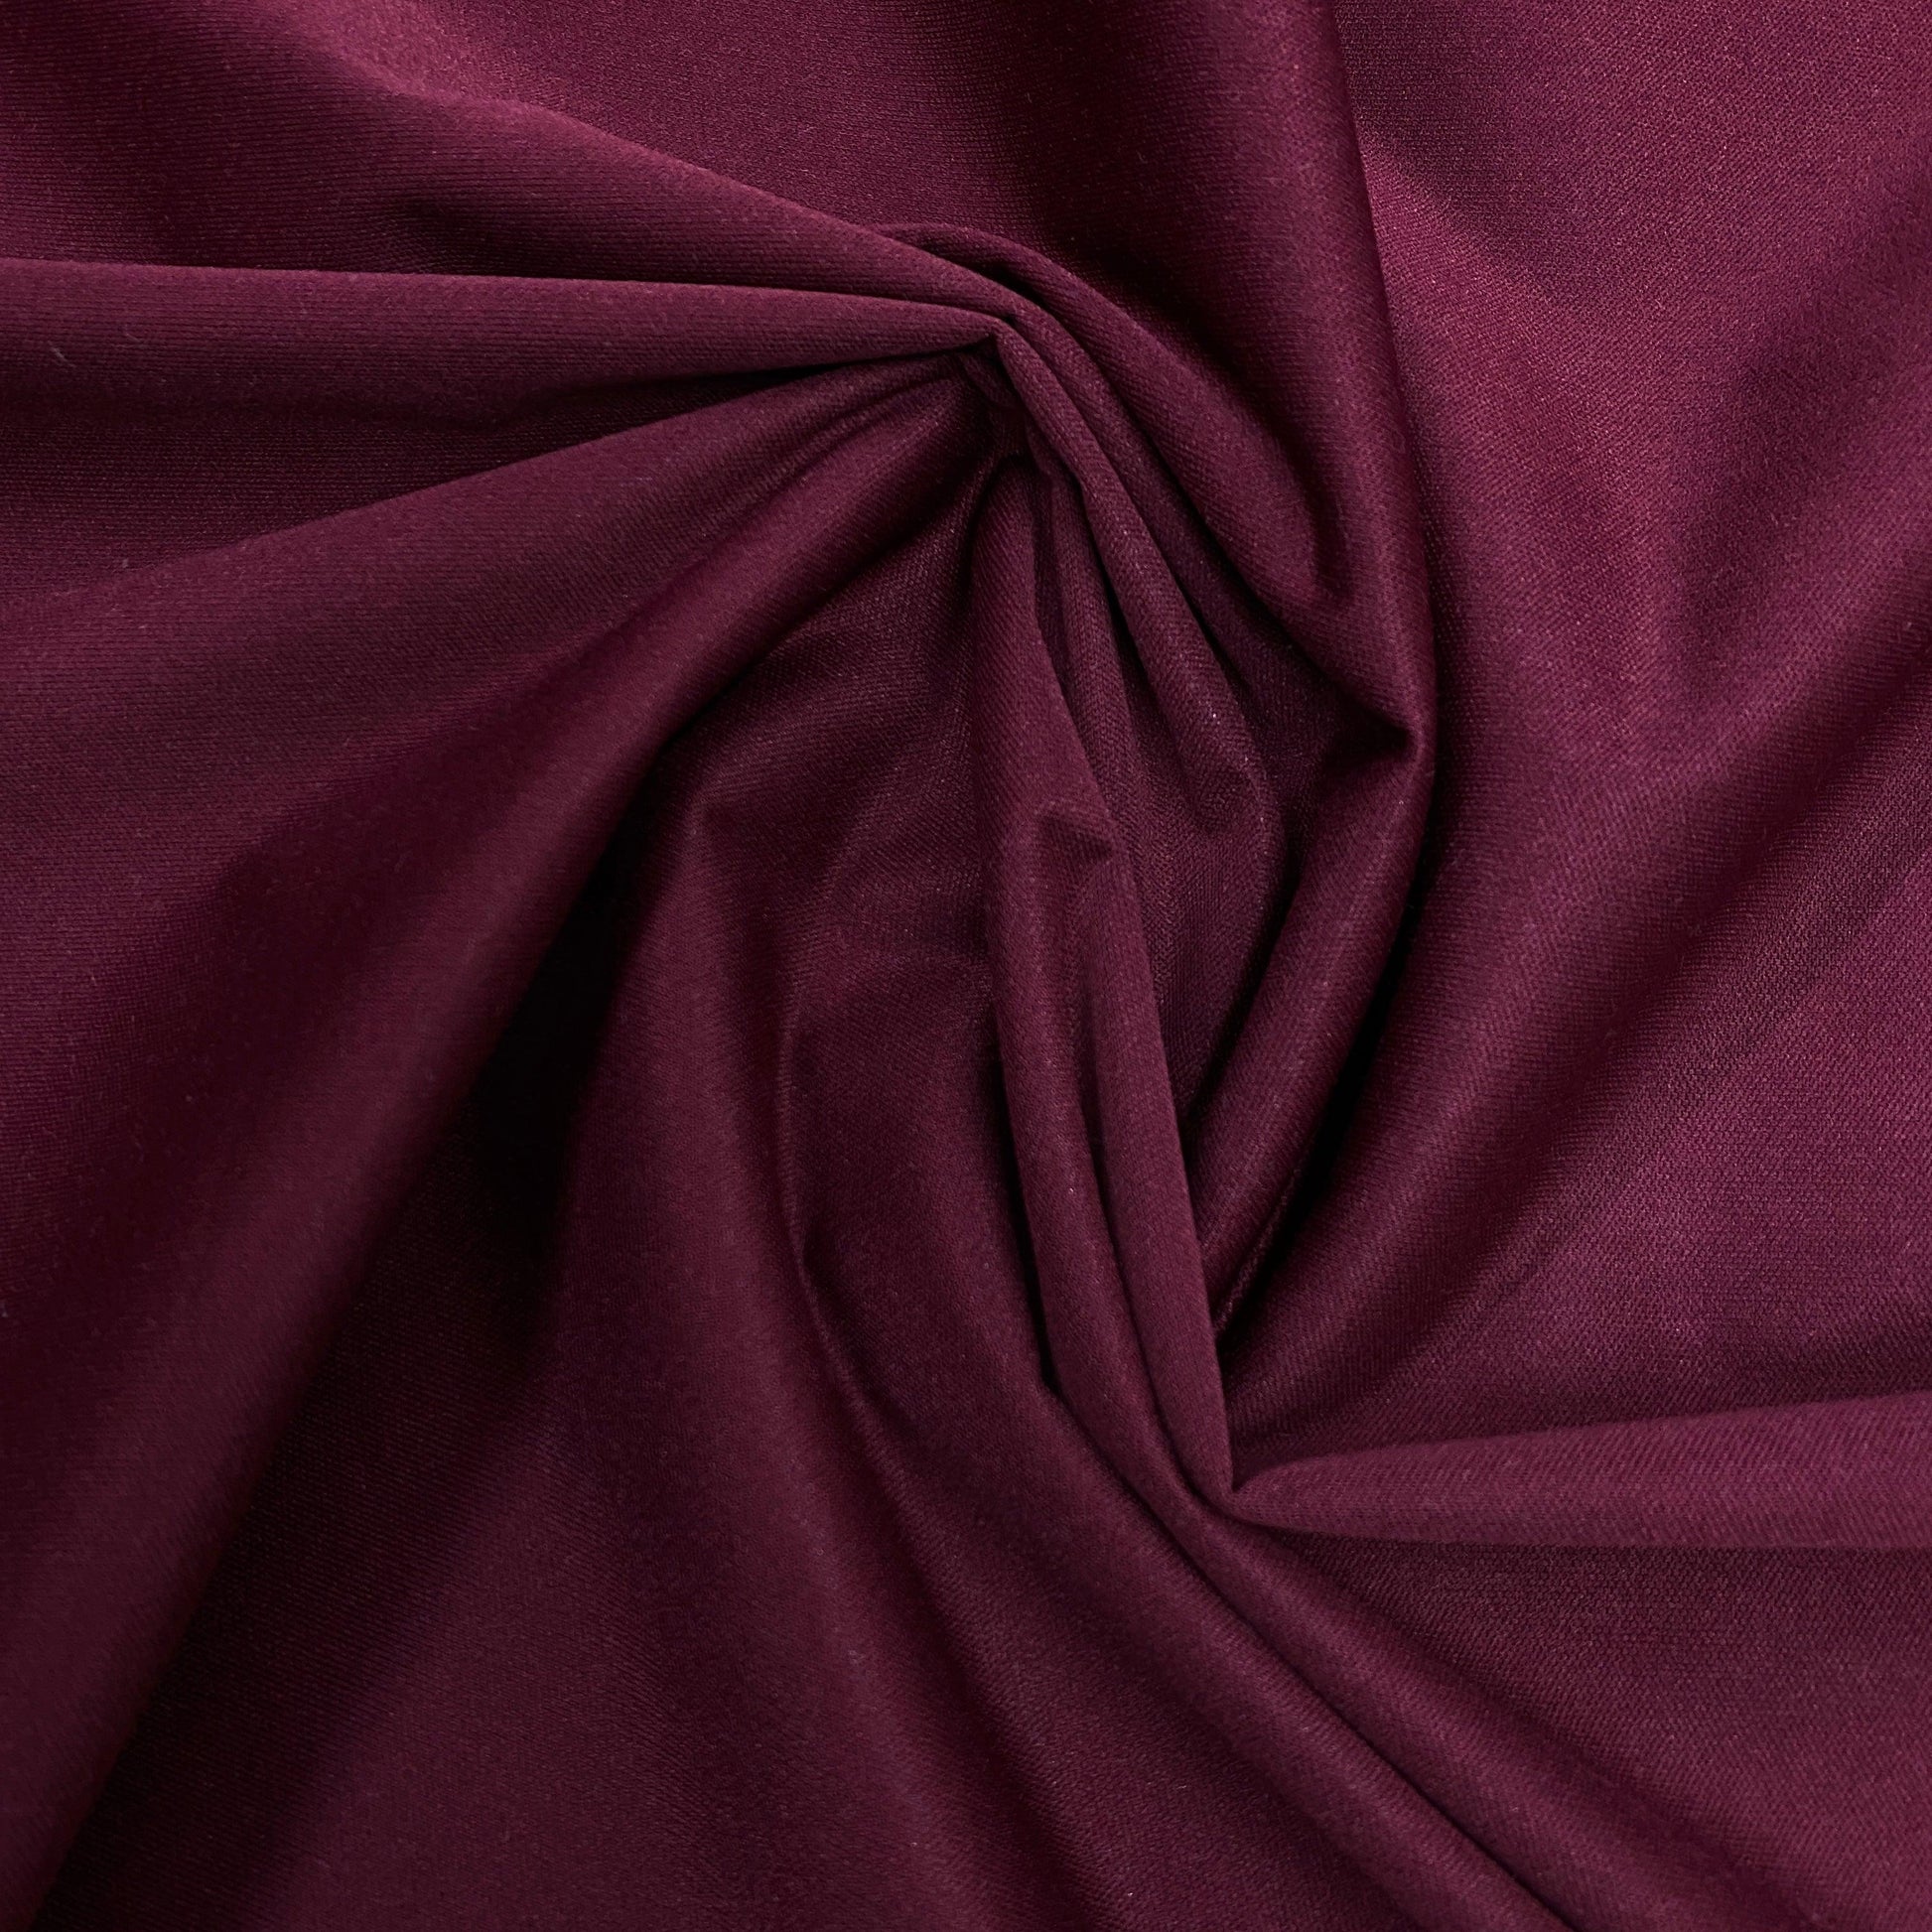 Burgundy 1 mil PUL Fabric - Made in the USA - Nature's Fabrics